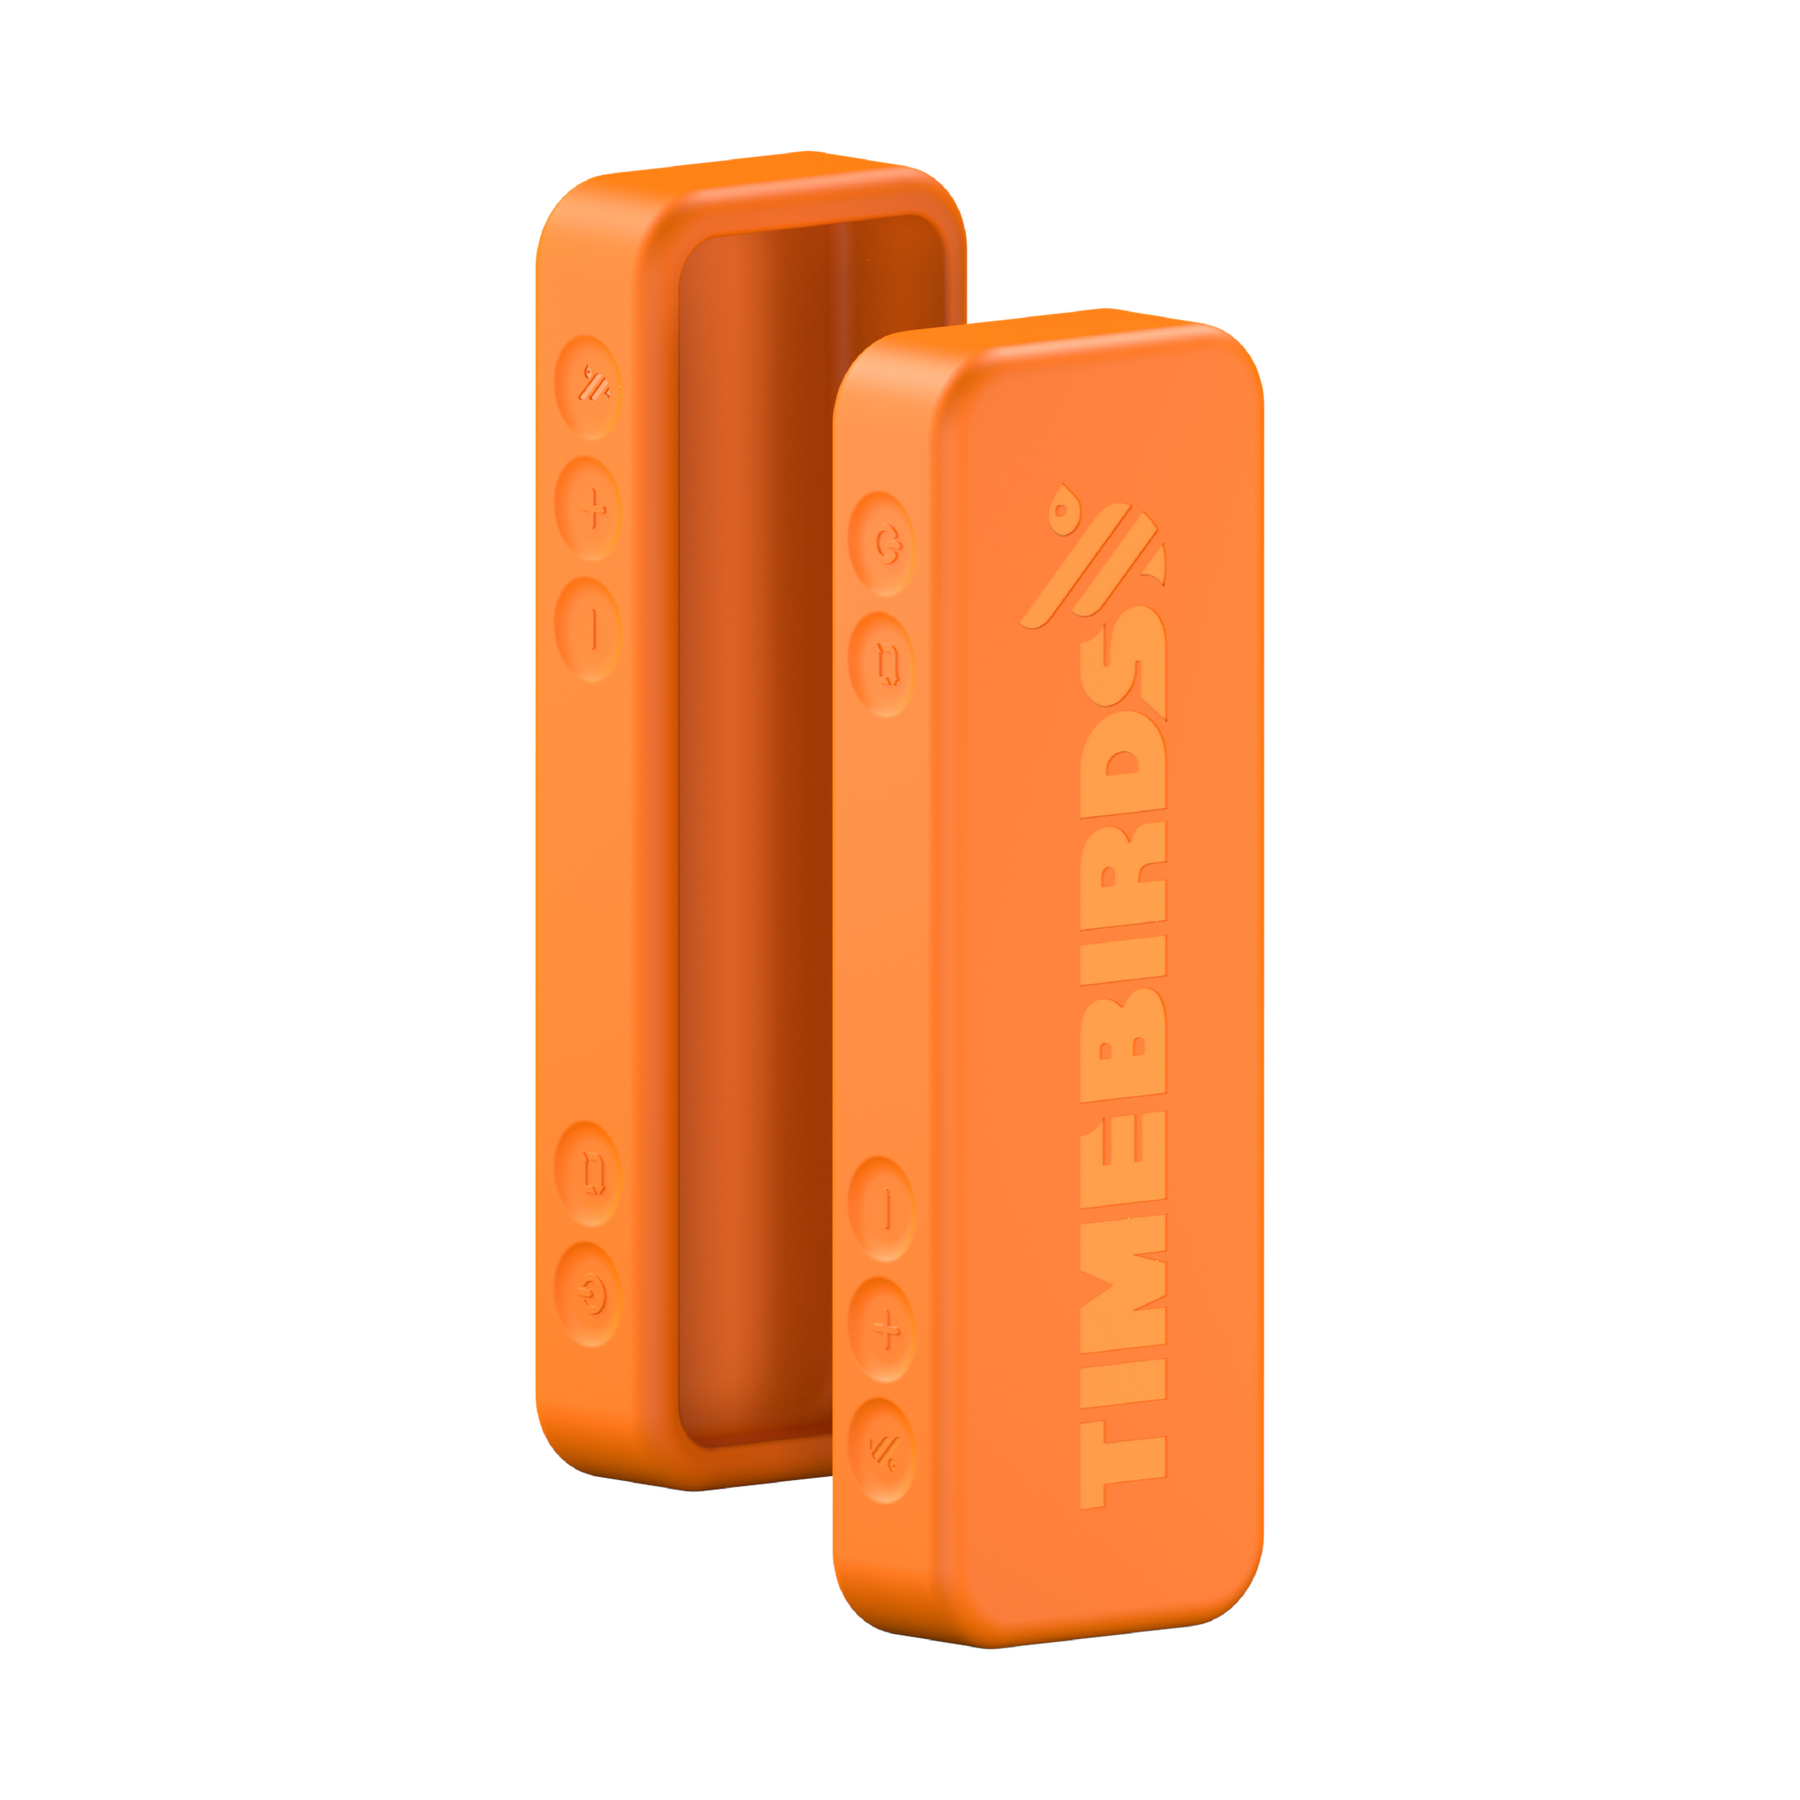 Timebirds™ Protective Case - All out Orange